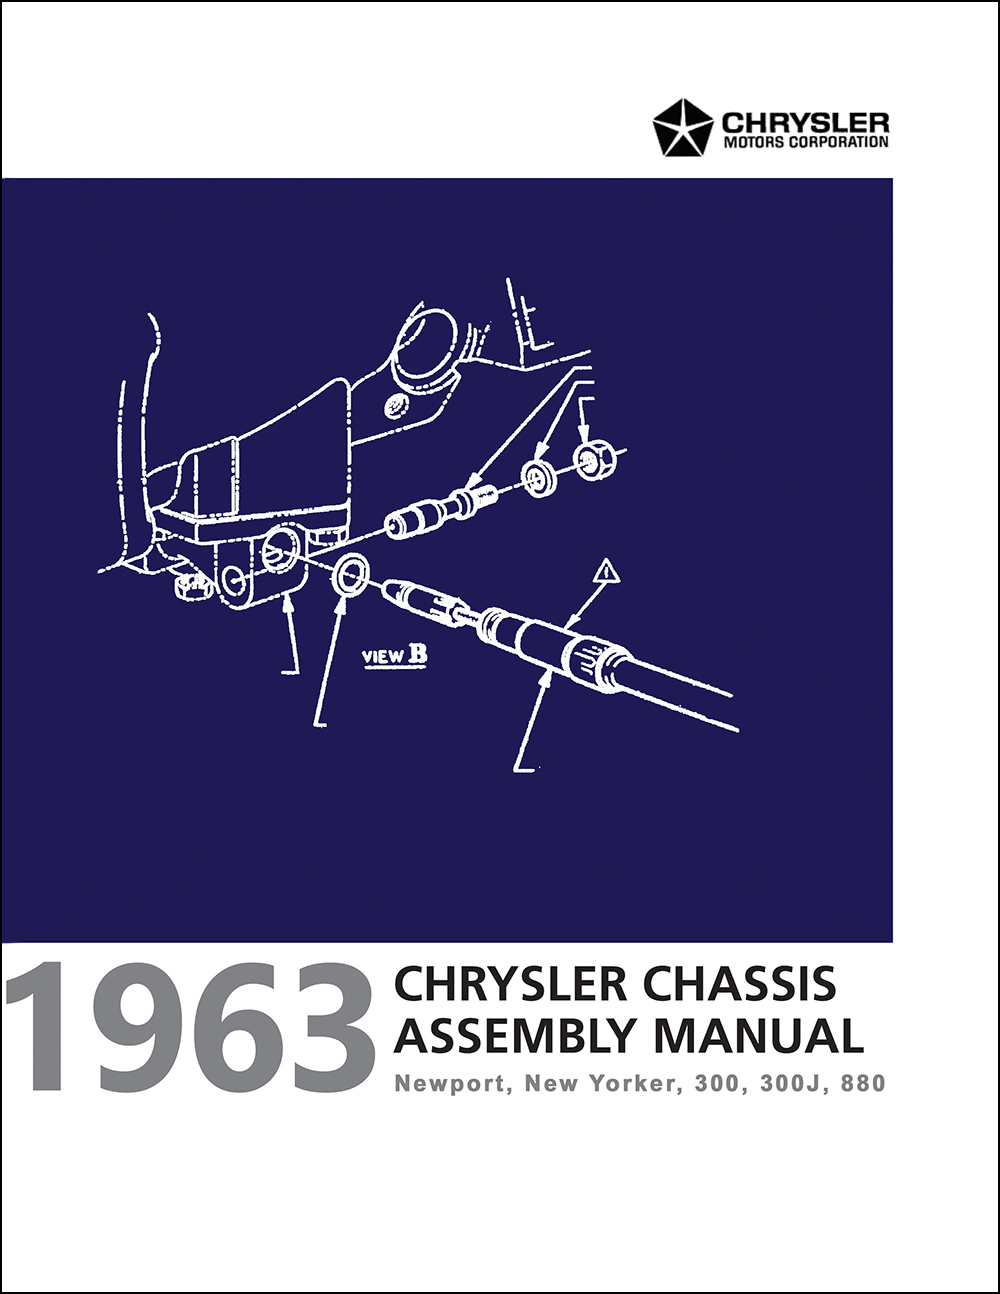 1963 Chrysler and Dodge 880 Chassis Assembly Manual Reprint 